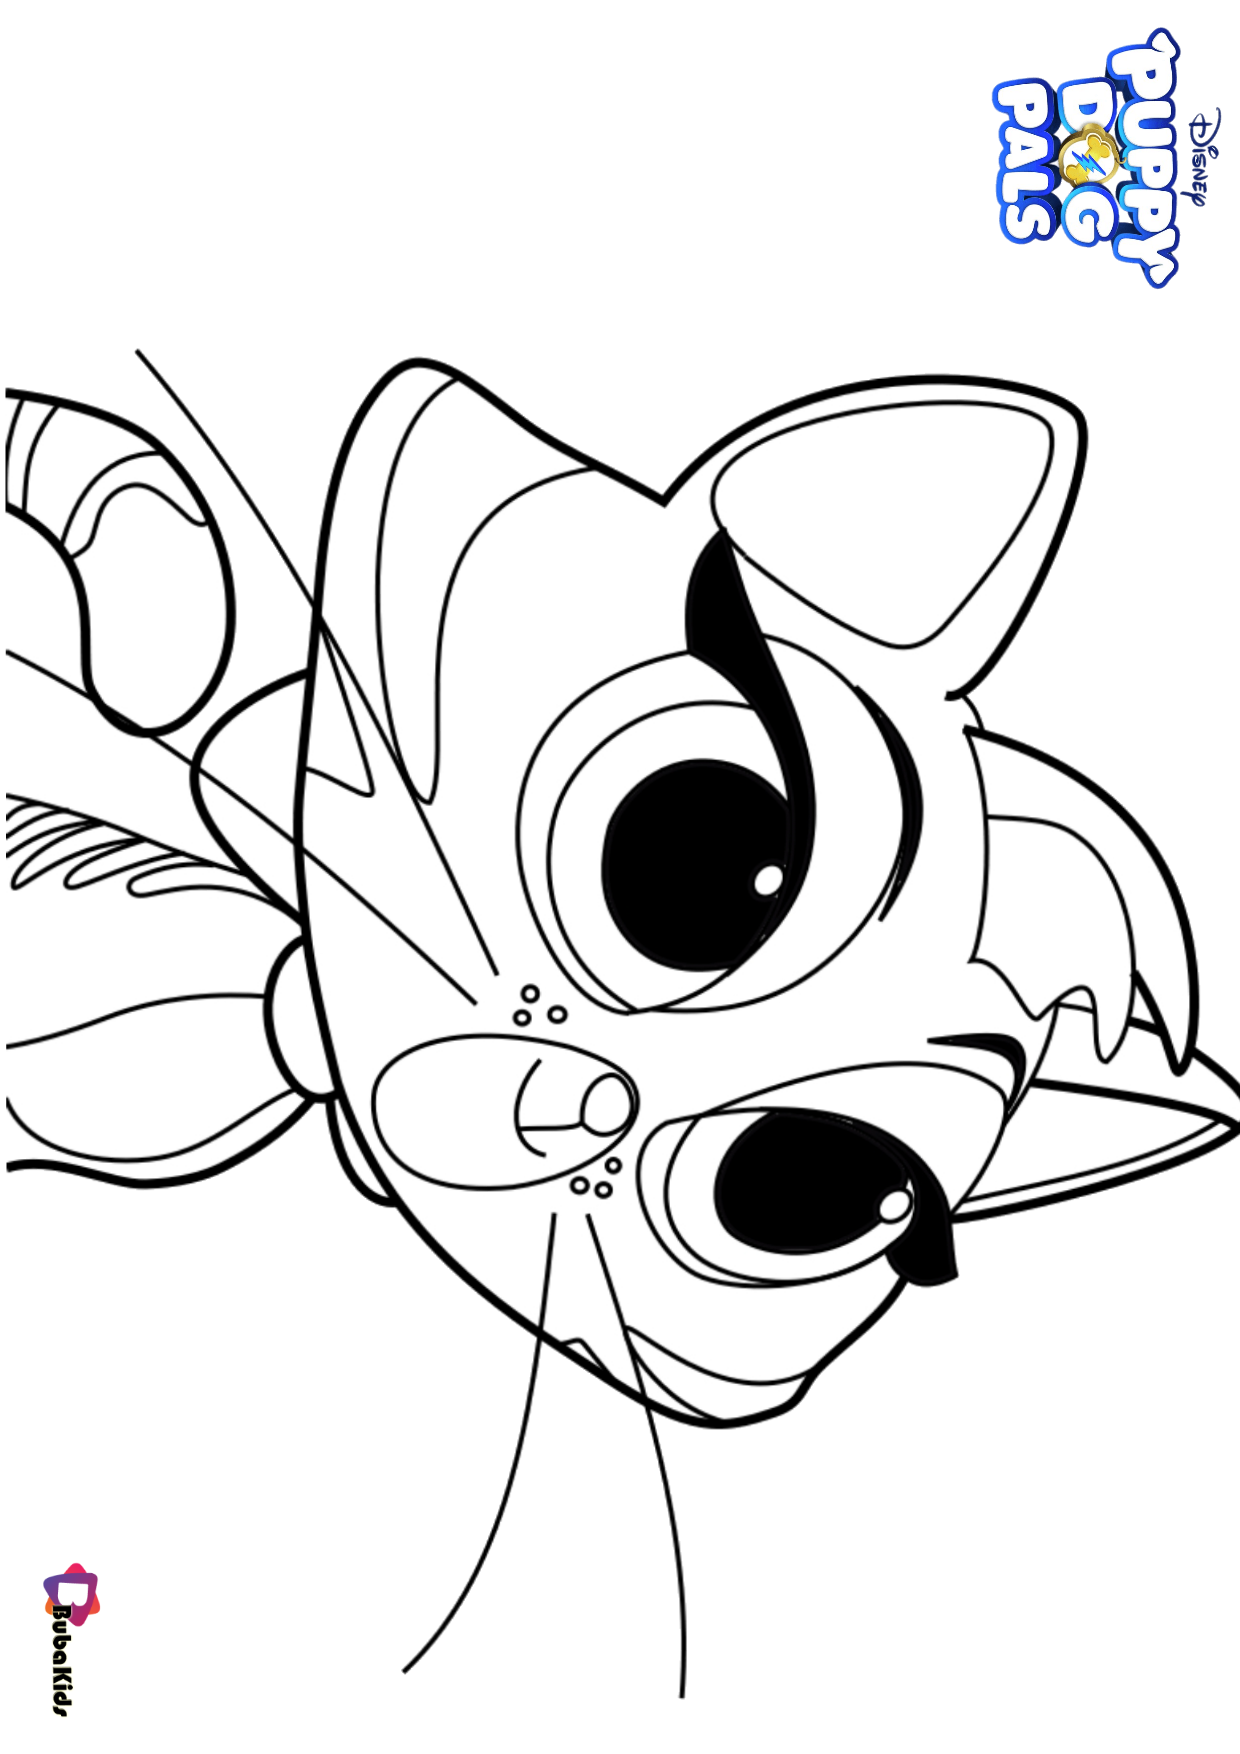 Hissy the purple cat Puppy Dog Pals Disney TV Series coloring page Wallpaper